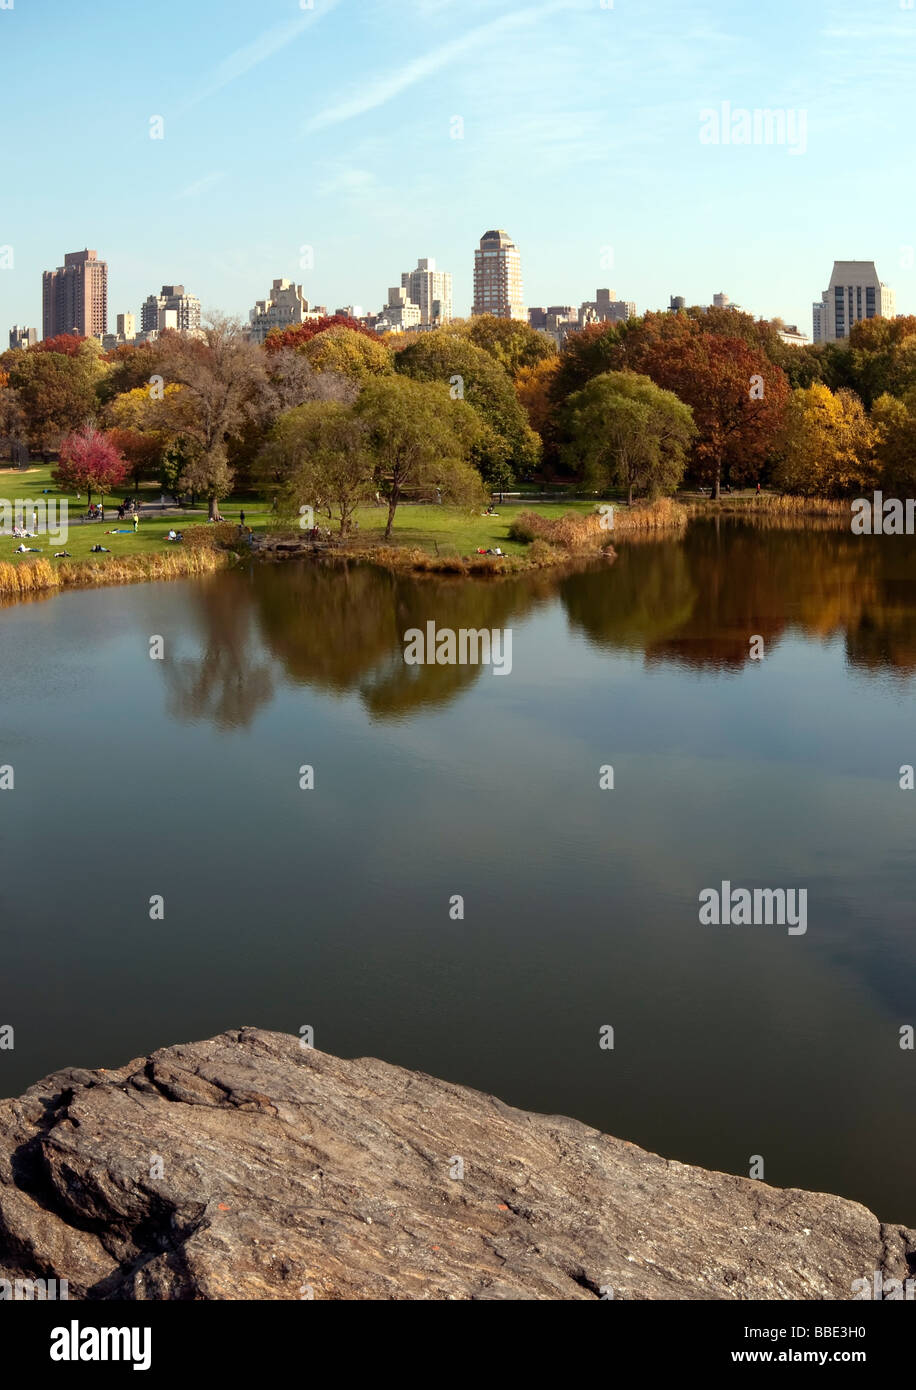 The view from Belvedere Castle over Belvedere lake towards Fifth Avenue, Central Park, New York, USA. Nov 2008 Stock Photo